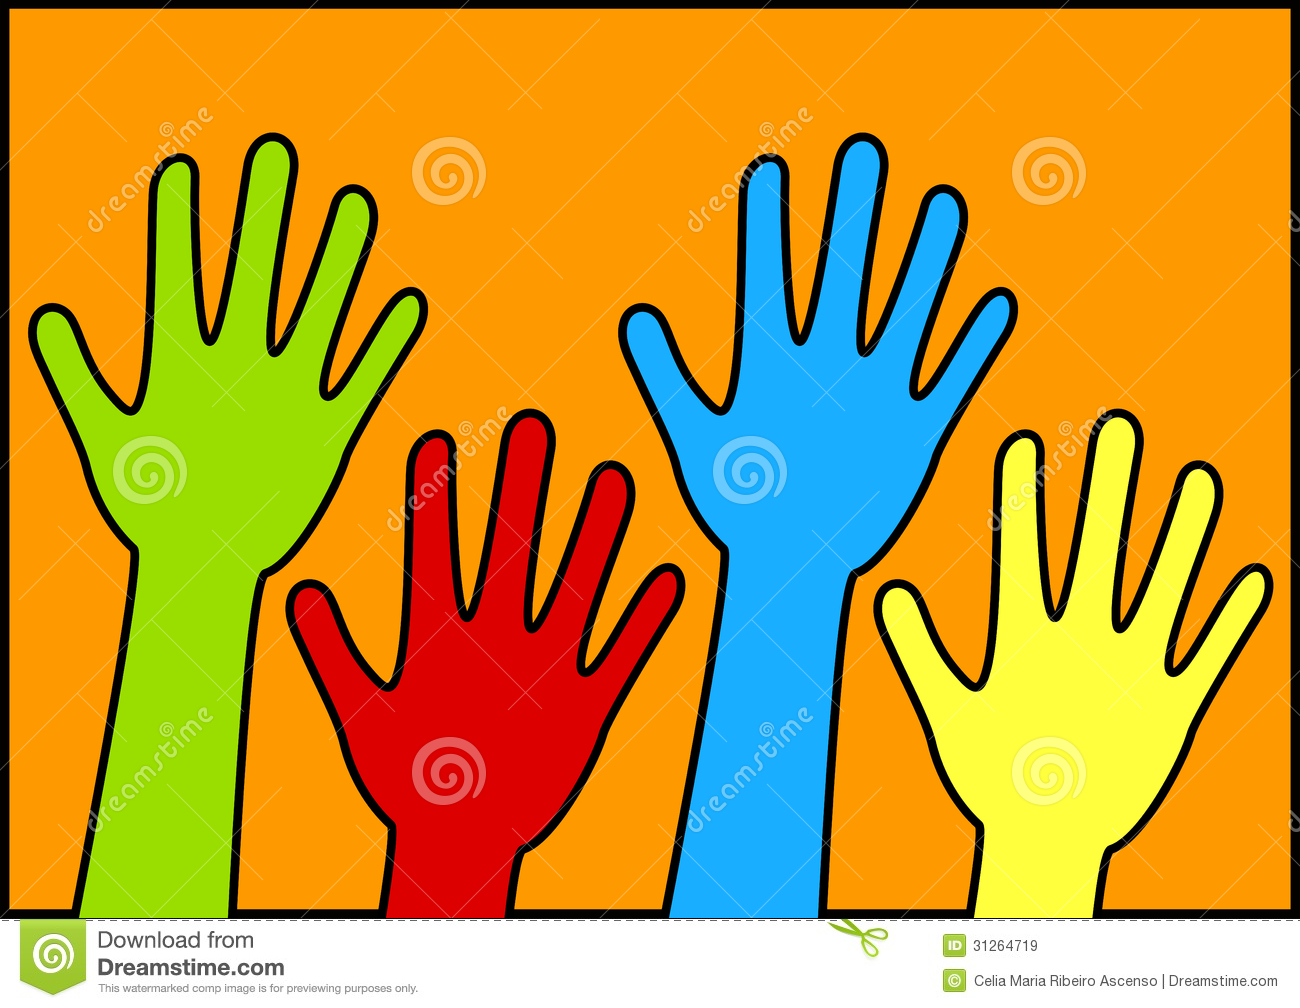 Hand Waving Goodbye Animation Clipart   Free Clipart